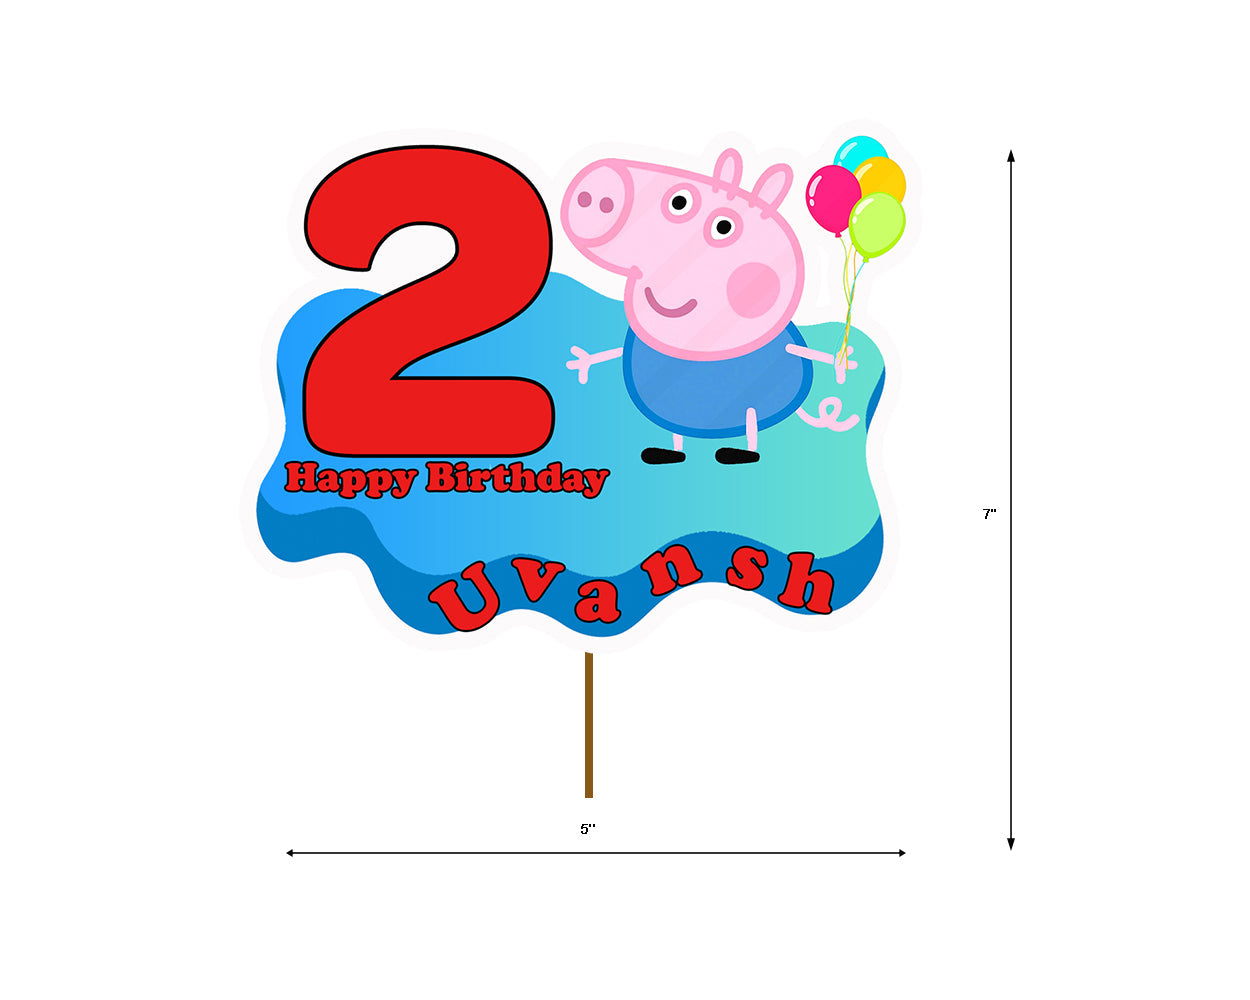 Peppa Pig Cake - Order Online Peppa Pig cake, Check Images, Price Near You